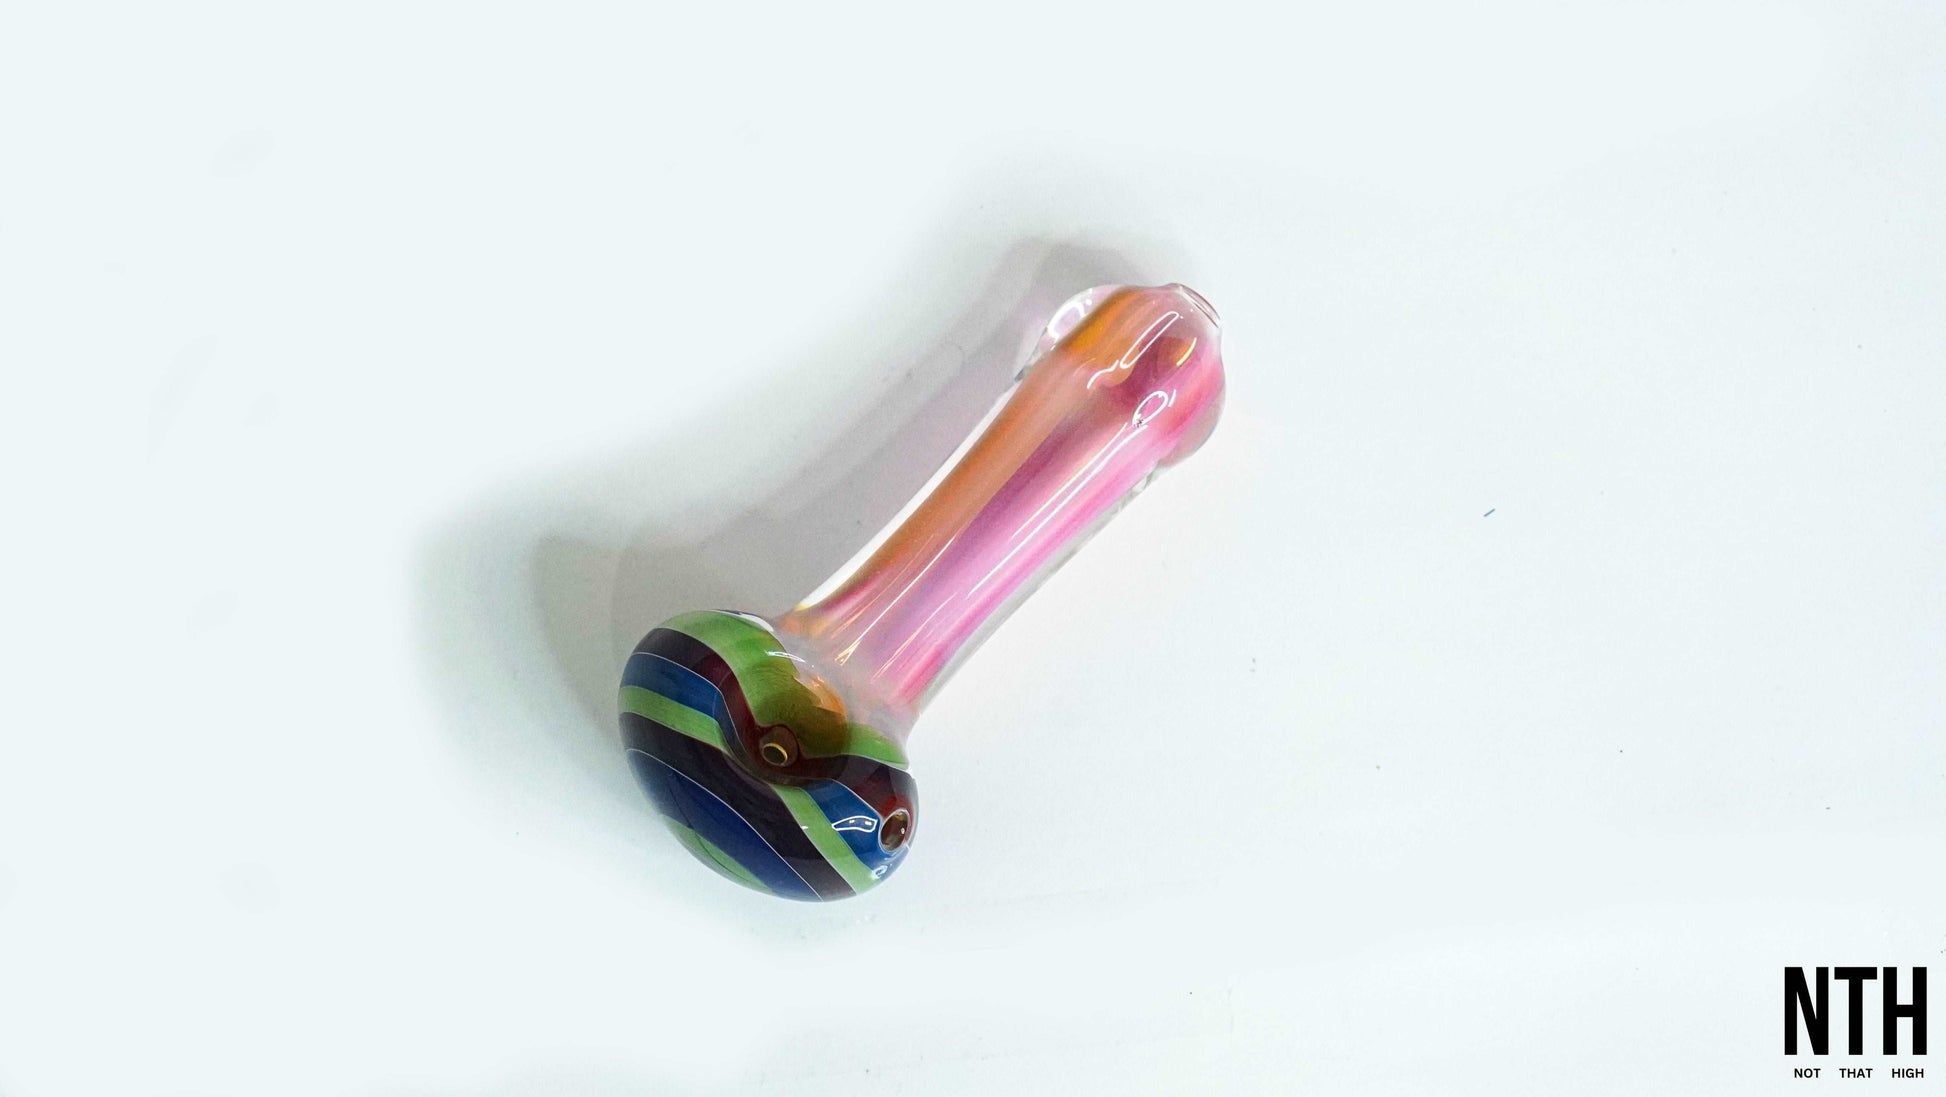 Onlybongs Superhelix Glass Pipe | Not That High